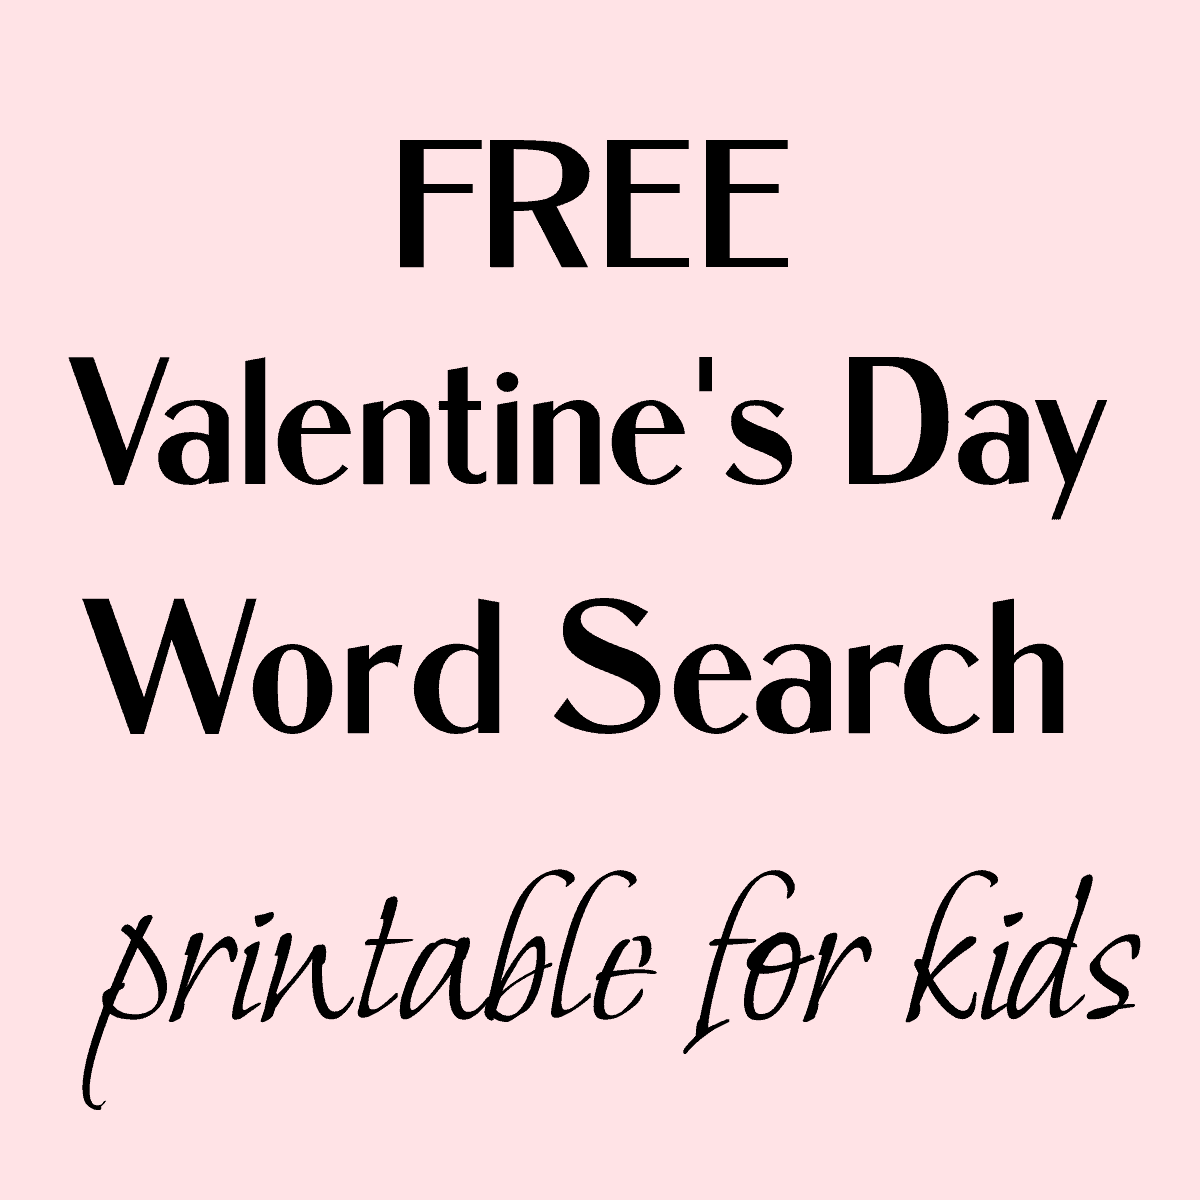 free word searchkids printable for valentine's day.